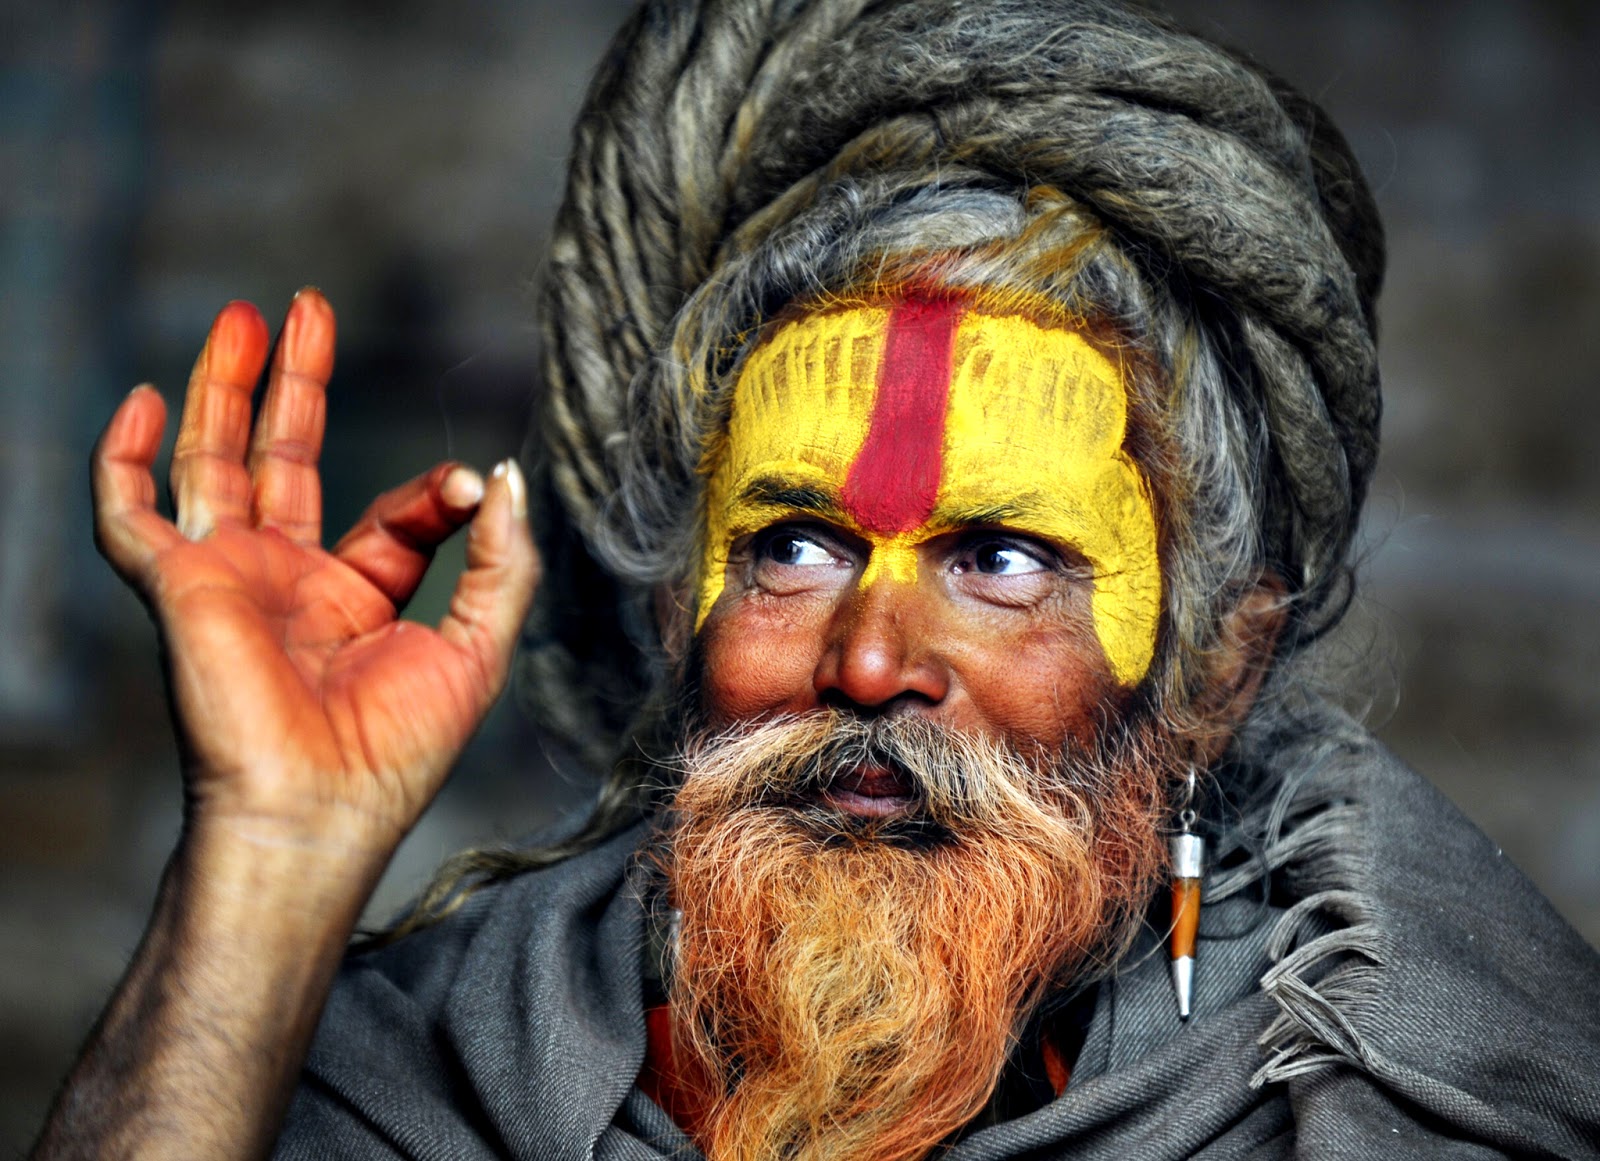 Why do people mostly Hindus apply tilak on their forehead?